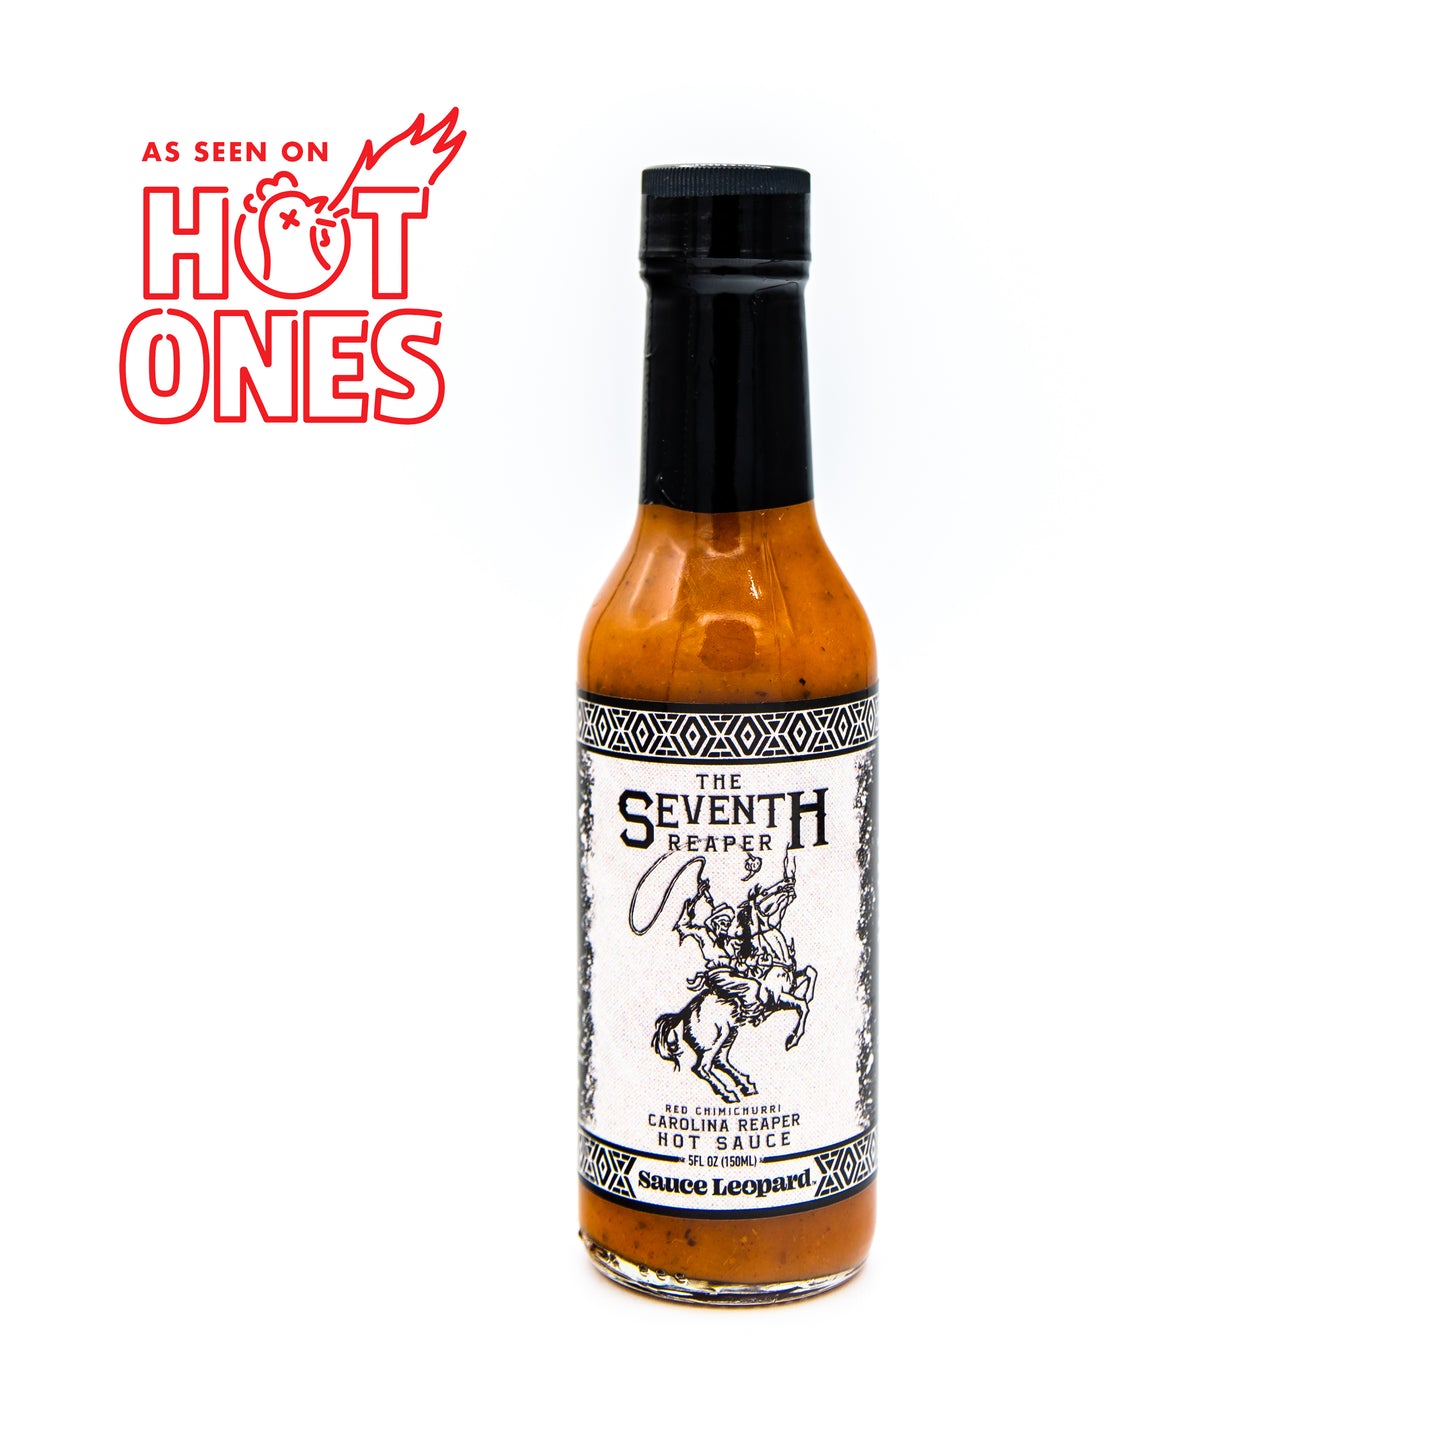 The Seventh Reaper - As Seen on Hot Ones